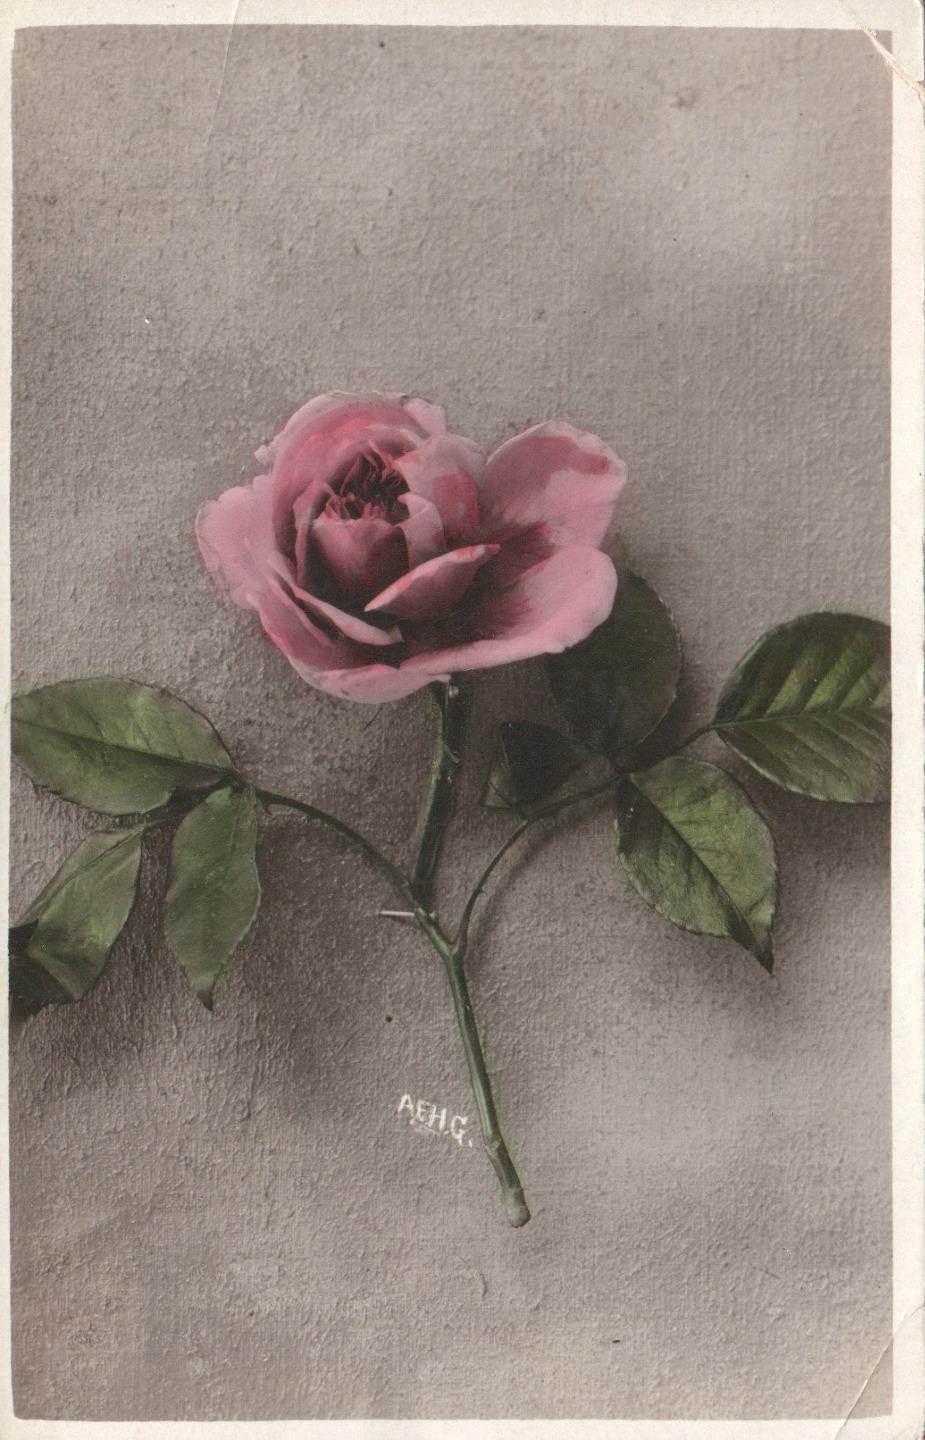 ANTIQUE Signed A.E.H.G. Hand-Coloured Real Photo Pink Rose POSTCARD - UNUSED